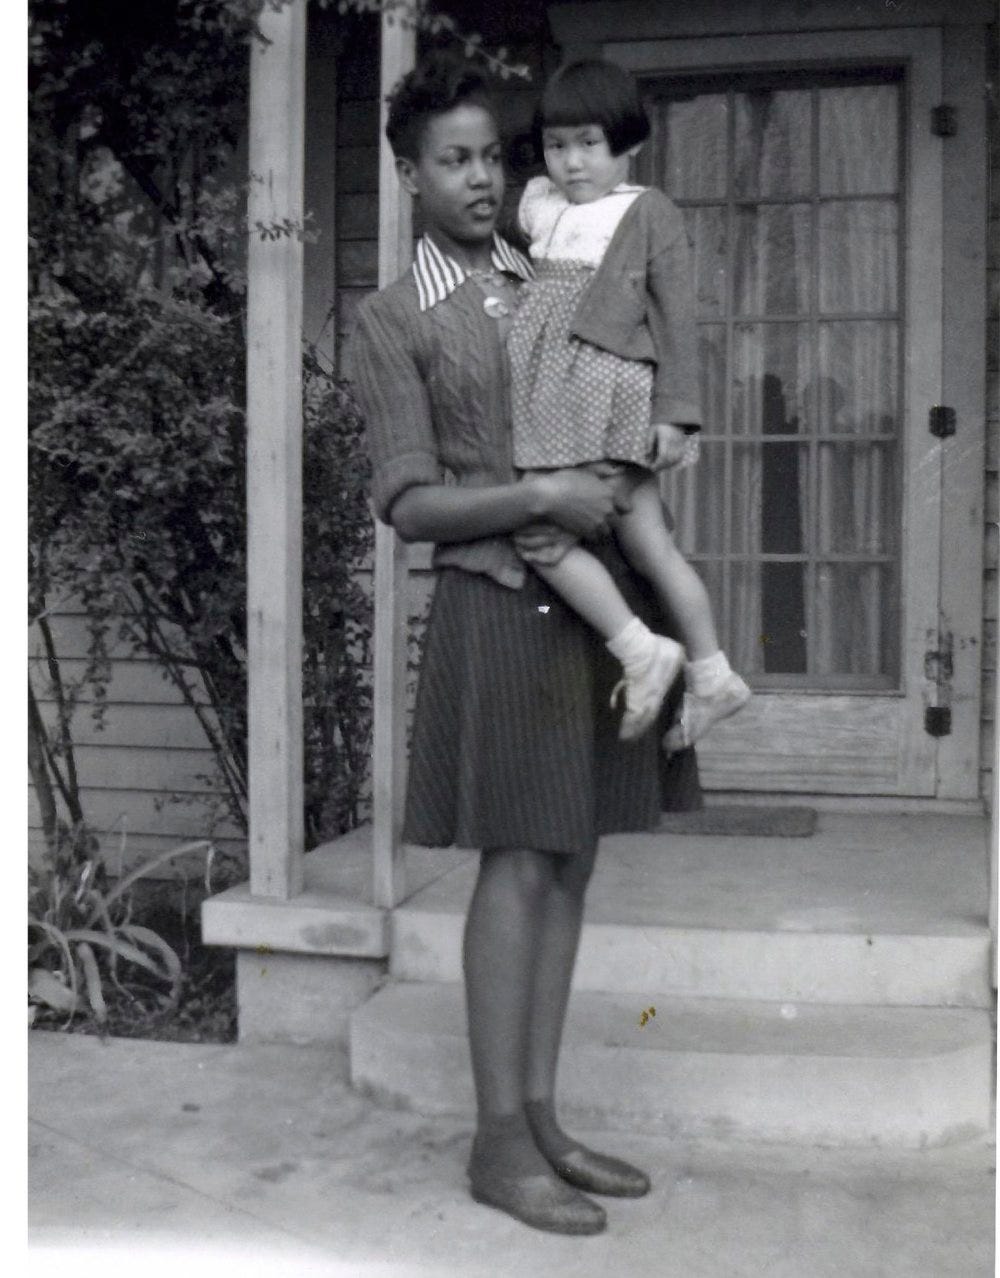 Archival black and white image of a Black woman holding a Japanese American child on the porch of a house.